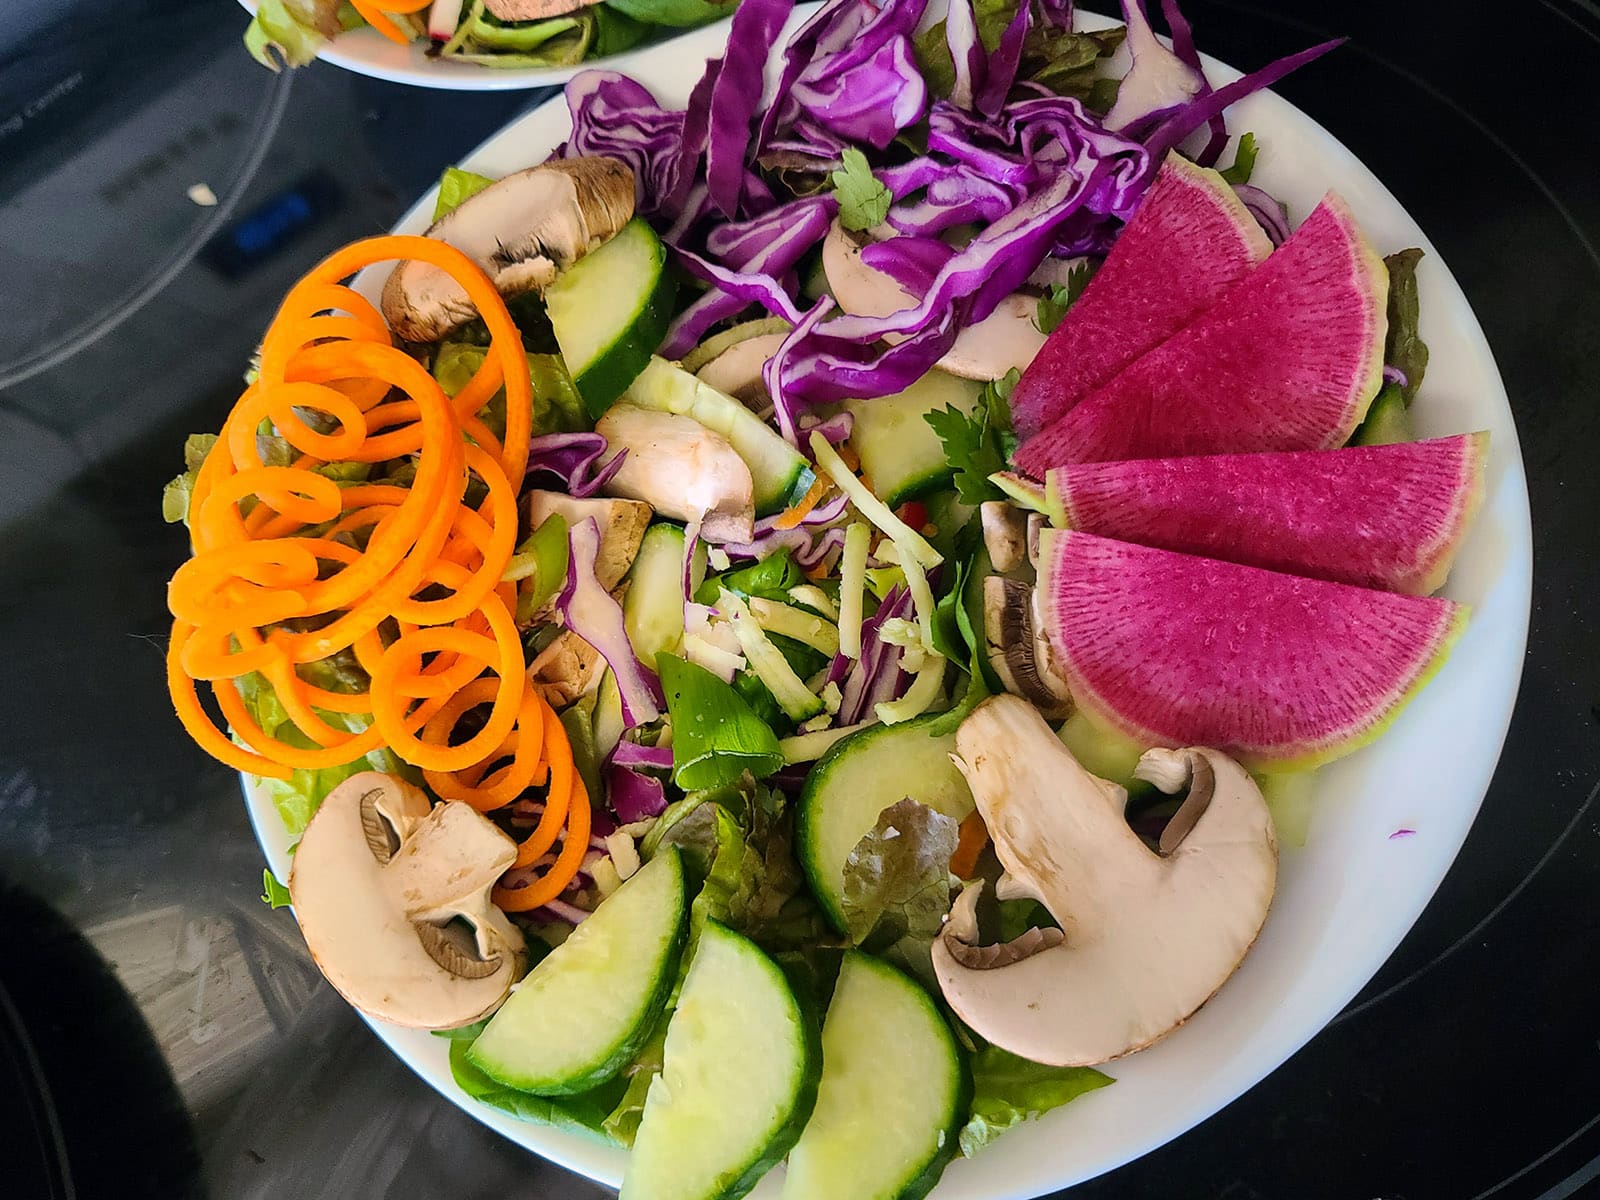 A base salad with the topping ingredients arranged on top.